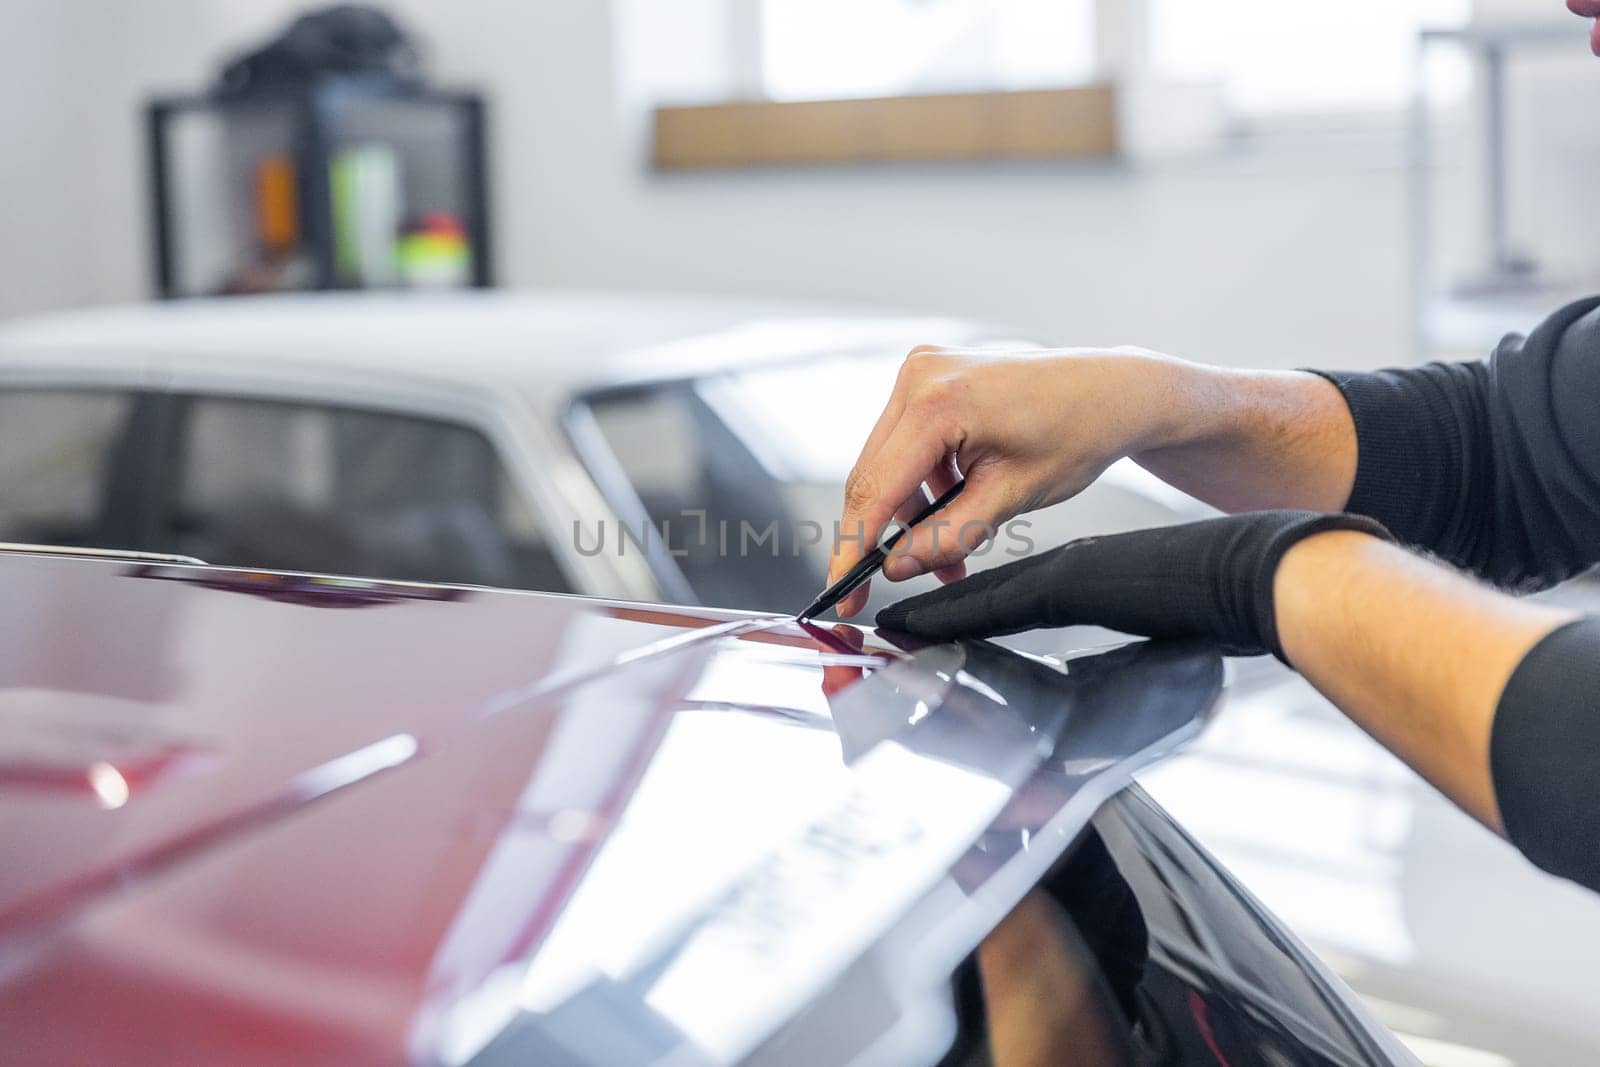 Process of gluing or wrapping a new foil wrap to car, car detailing concept